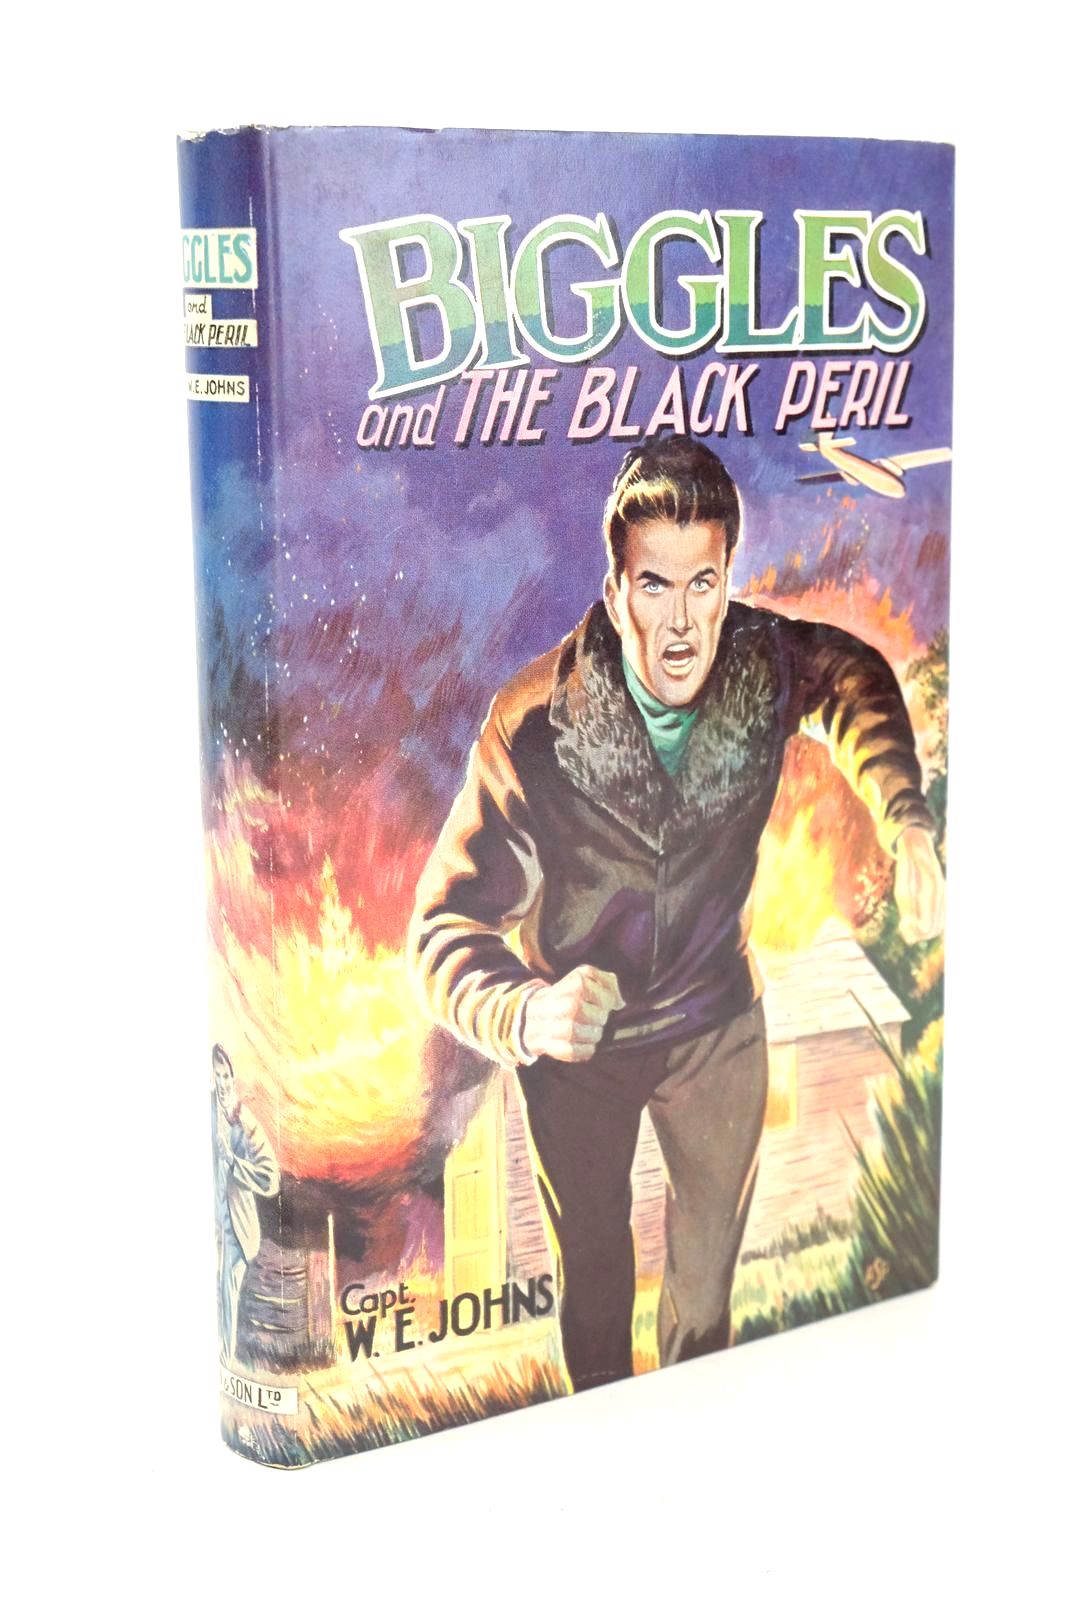 Photo of BIGGLES AND THE BLACK PERIL written by Johns, W.E. published by Dean &amp; Son Ltd. (STOCK CODE: 1326073)  for sale by Stella & Rose's Books